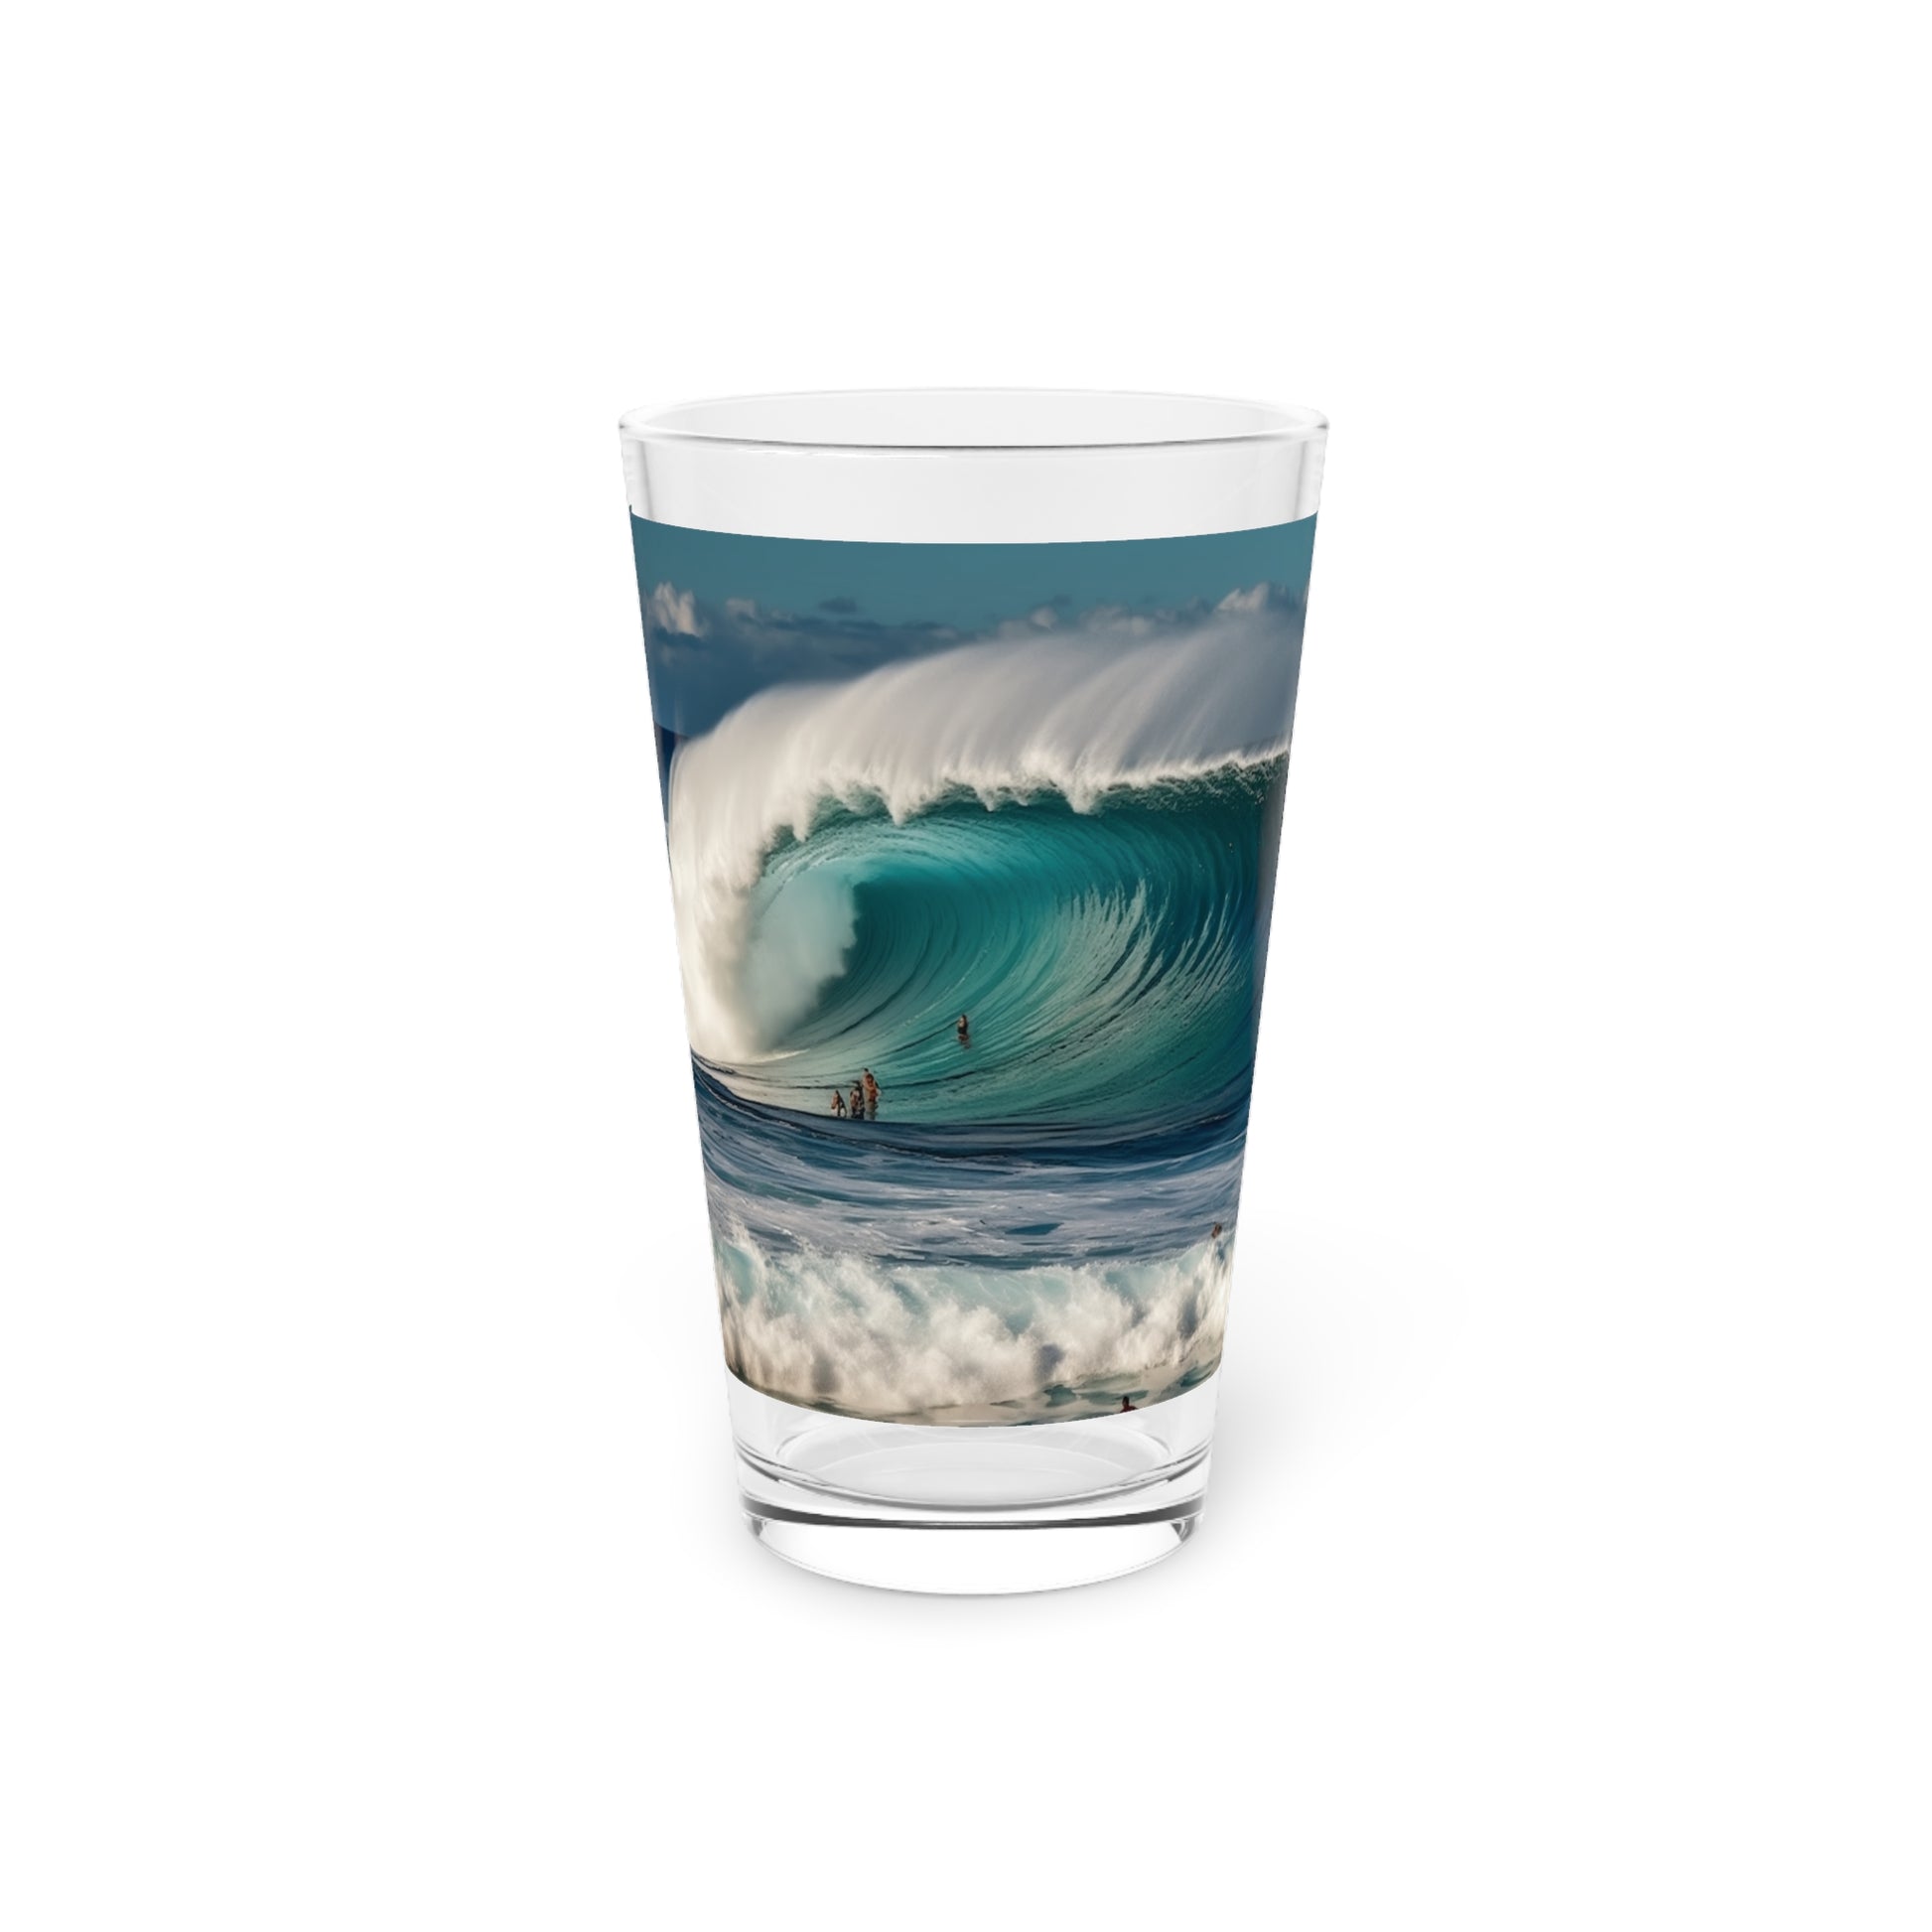 Experience the legendary Pipeline: North Shore, Oahu, Hawaii, US Pint Glass. Waves captured in a glass, exclusively at Stashbox.ai.